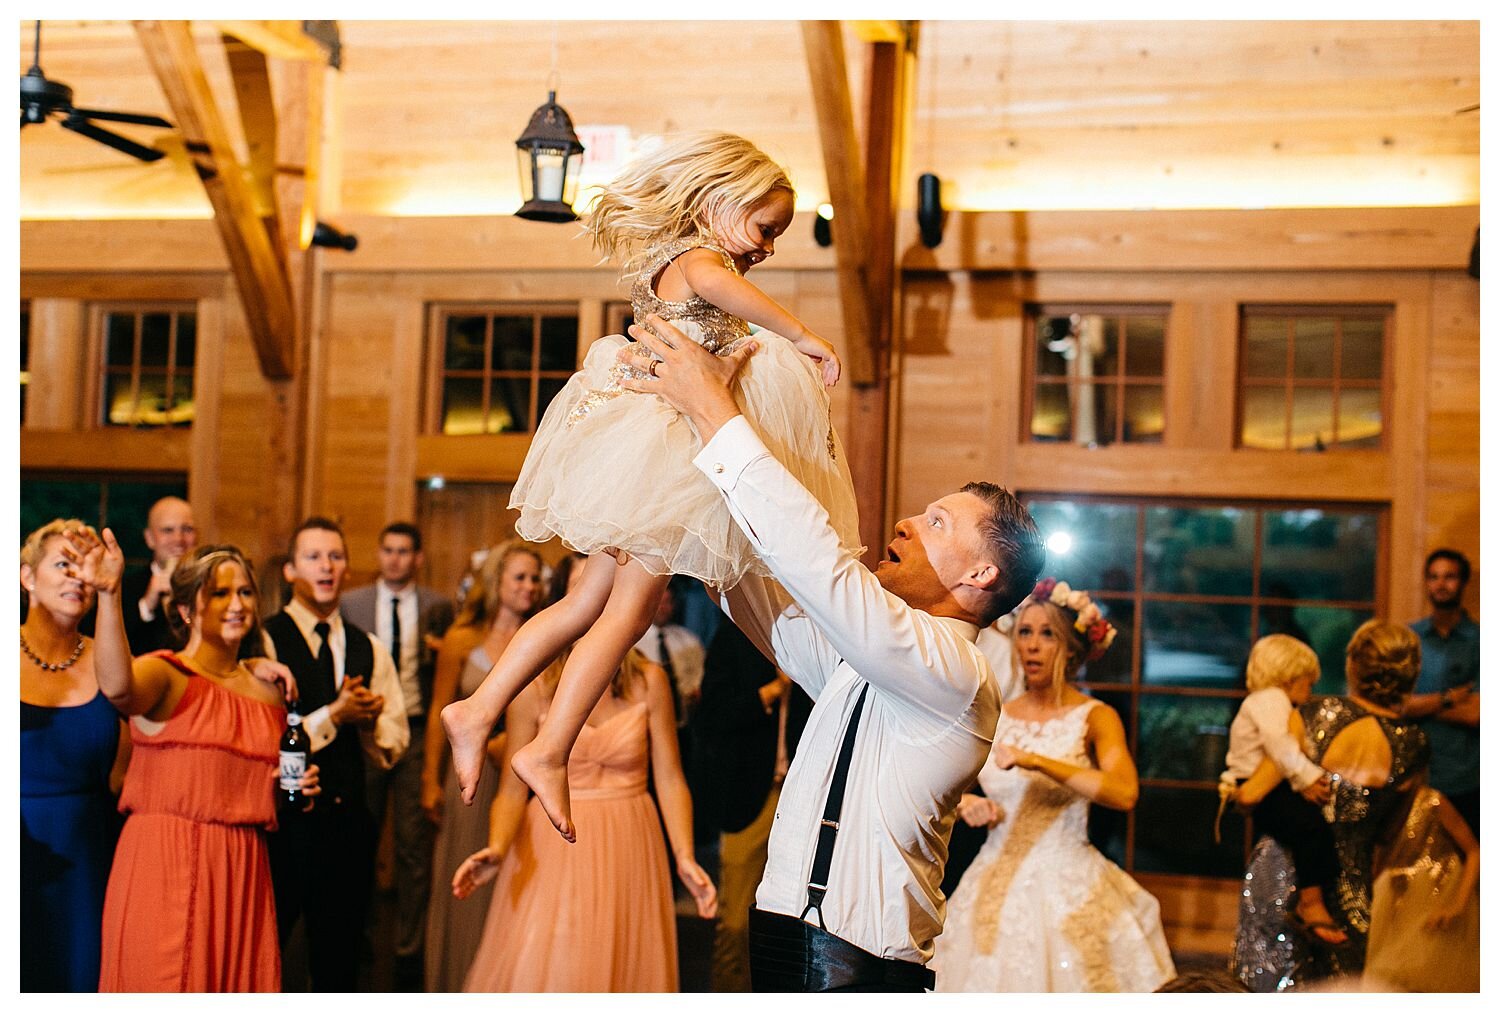 dancing with flower girl